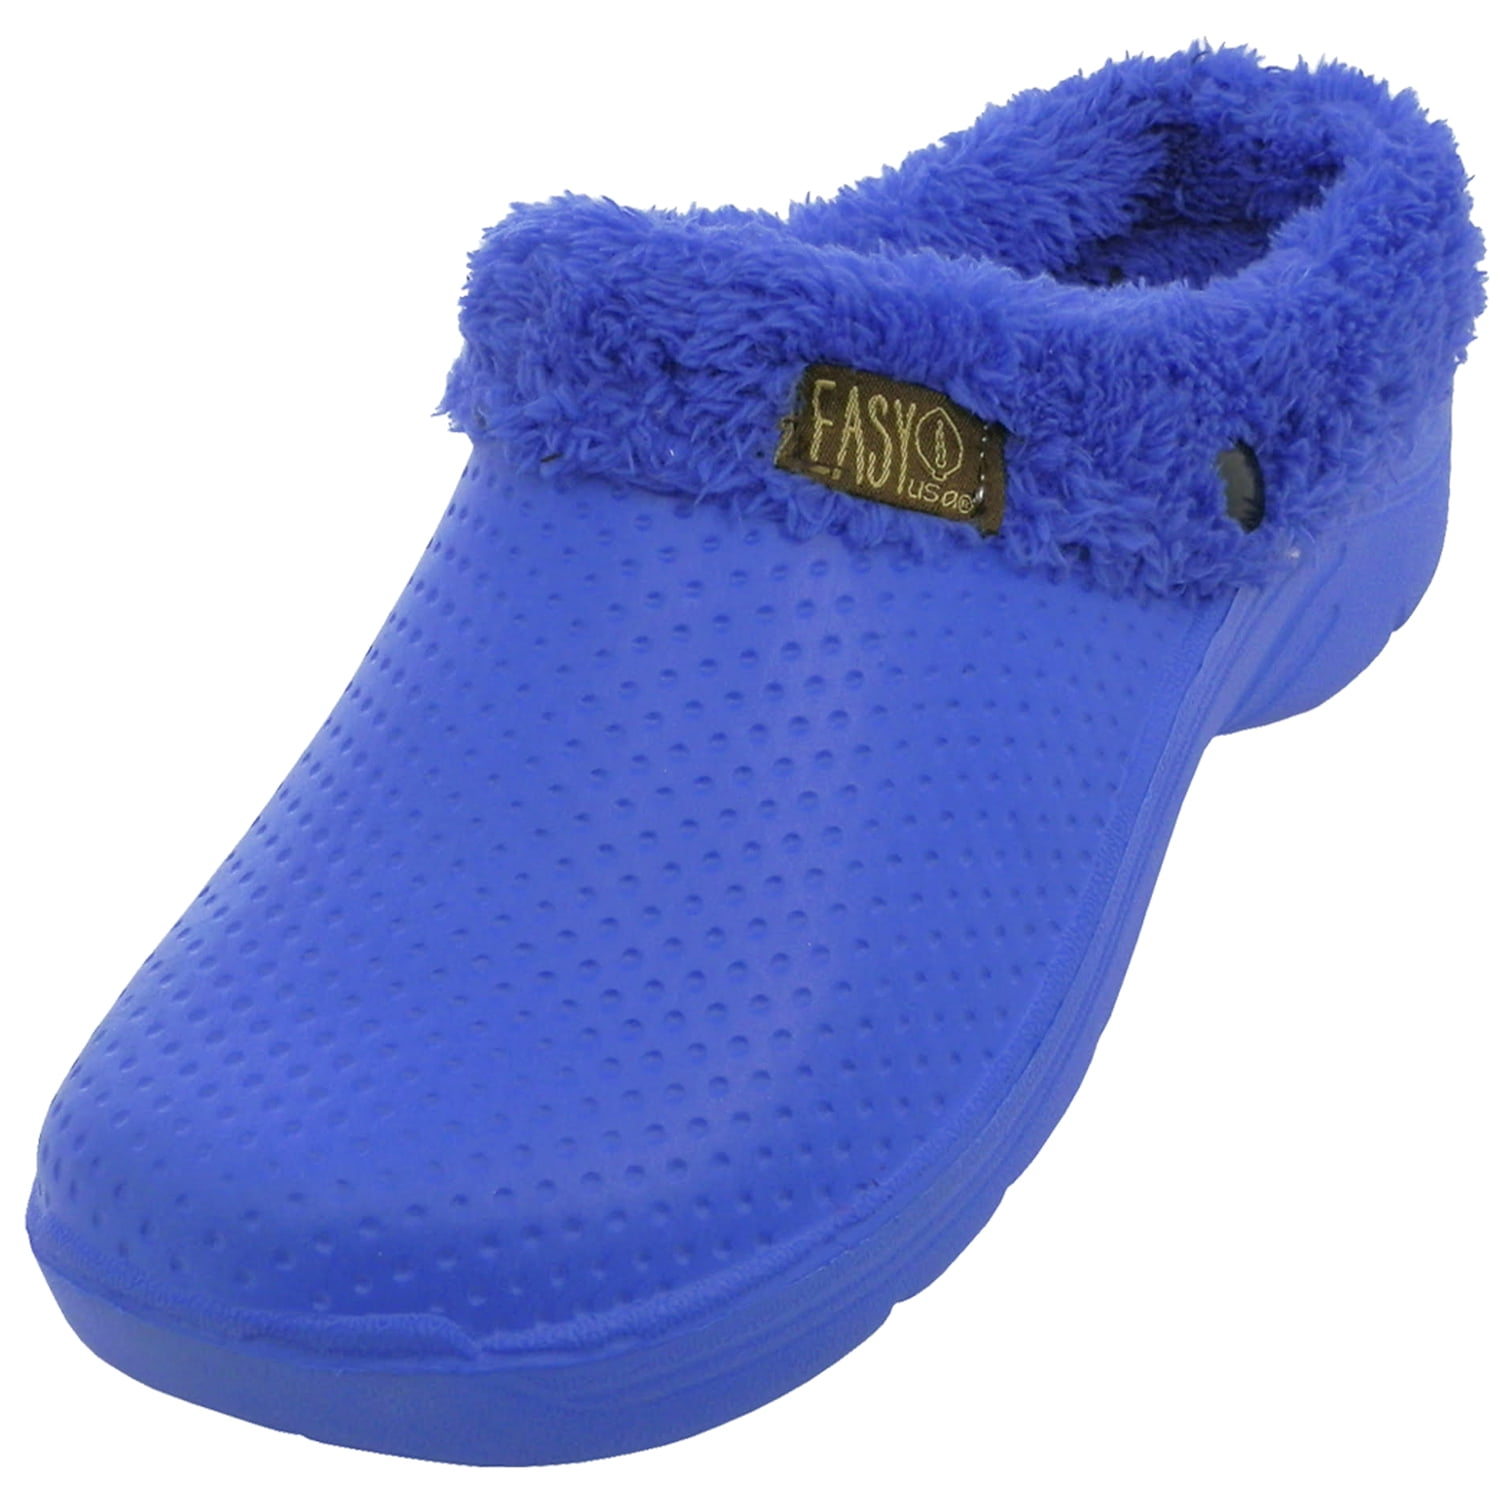 Briers Thermal Fur Fleece Small Fit Removable Lining Garden Clogs Cloggies 